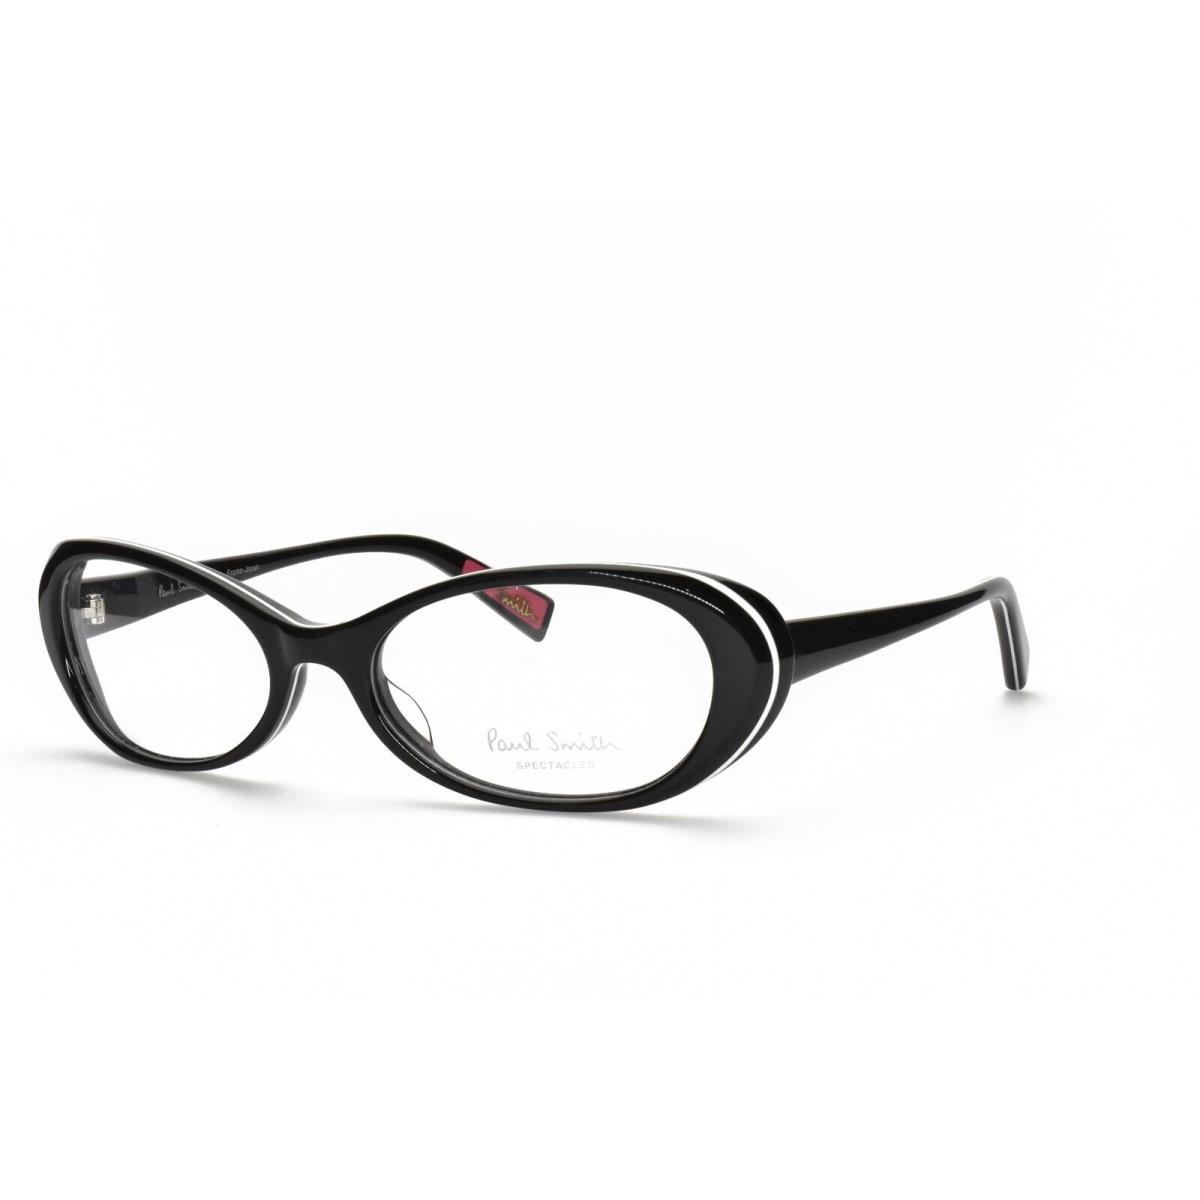 Paul Smith PS 415 Stw Eyeglasses Frames Only 51-17-136